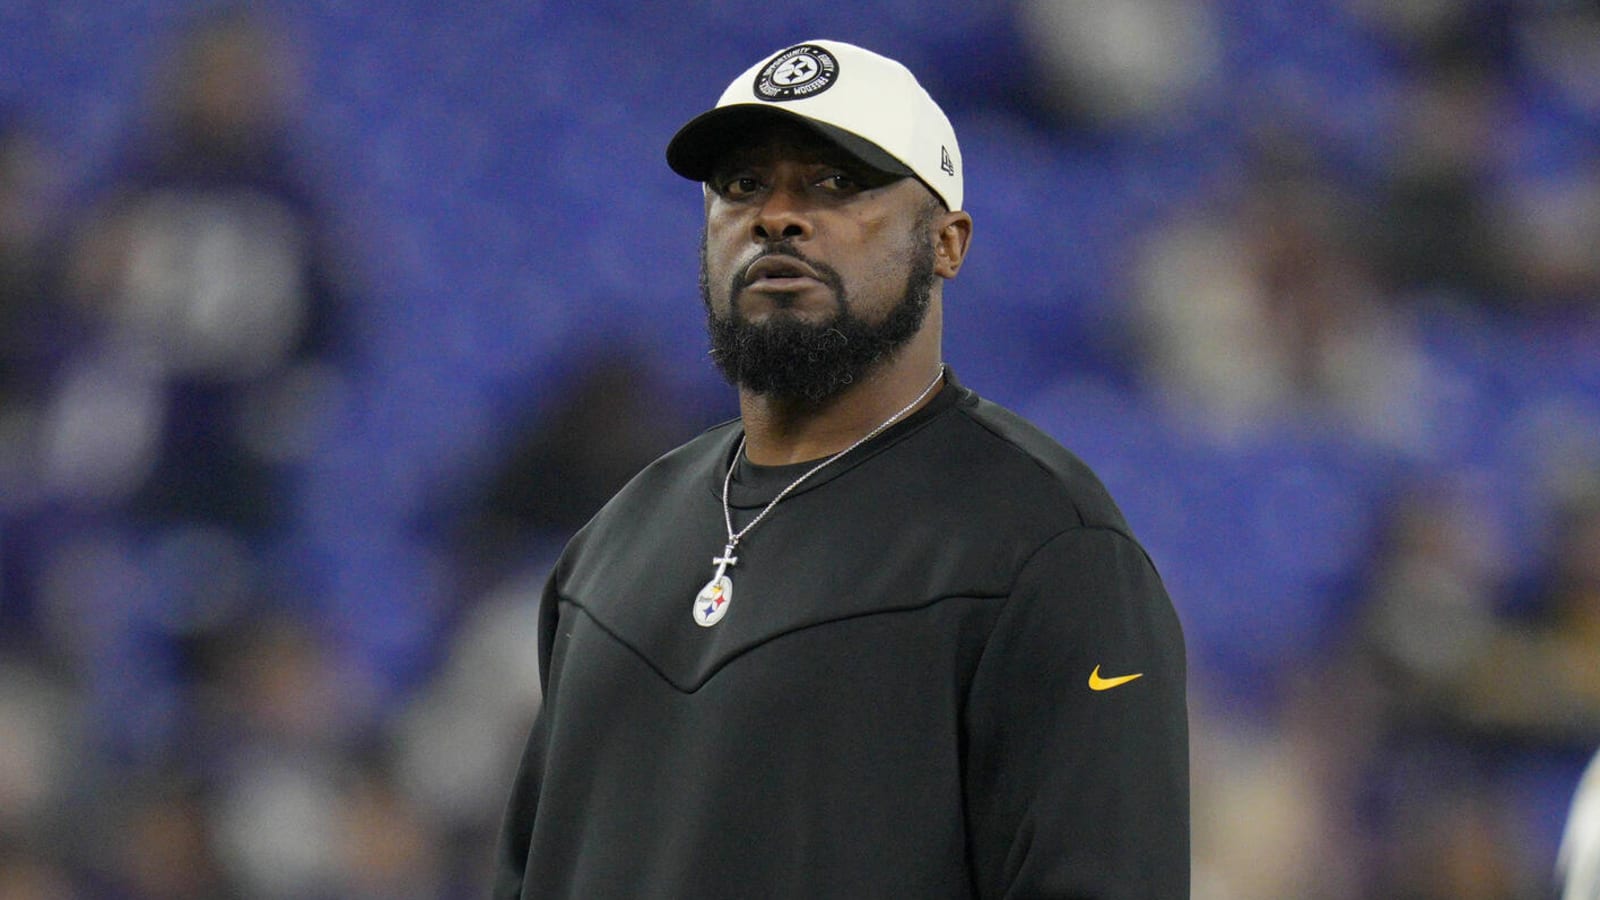 Mike Tomlin expects 'much more' from this player